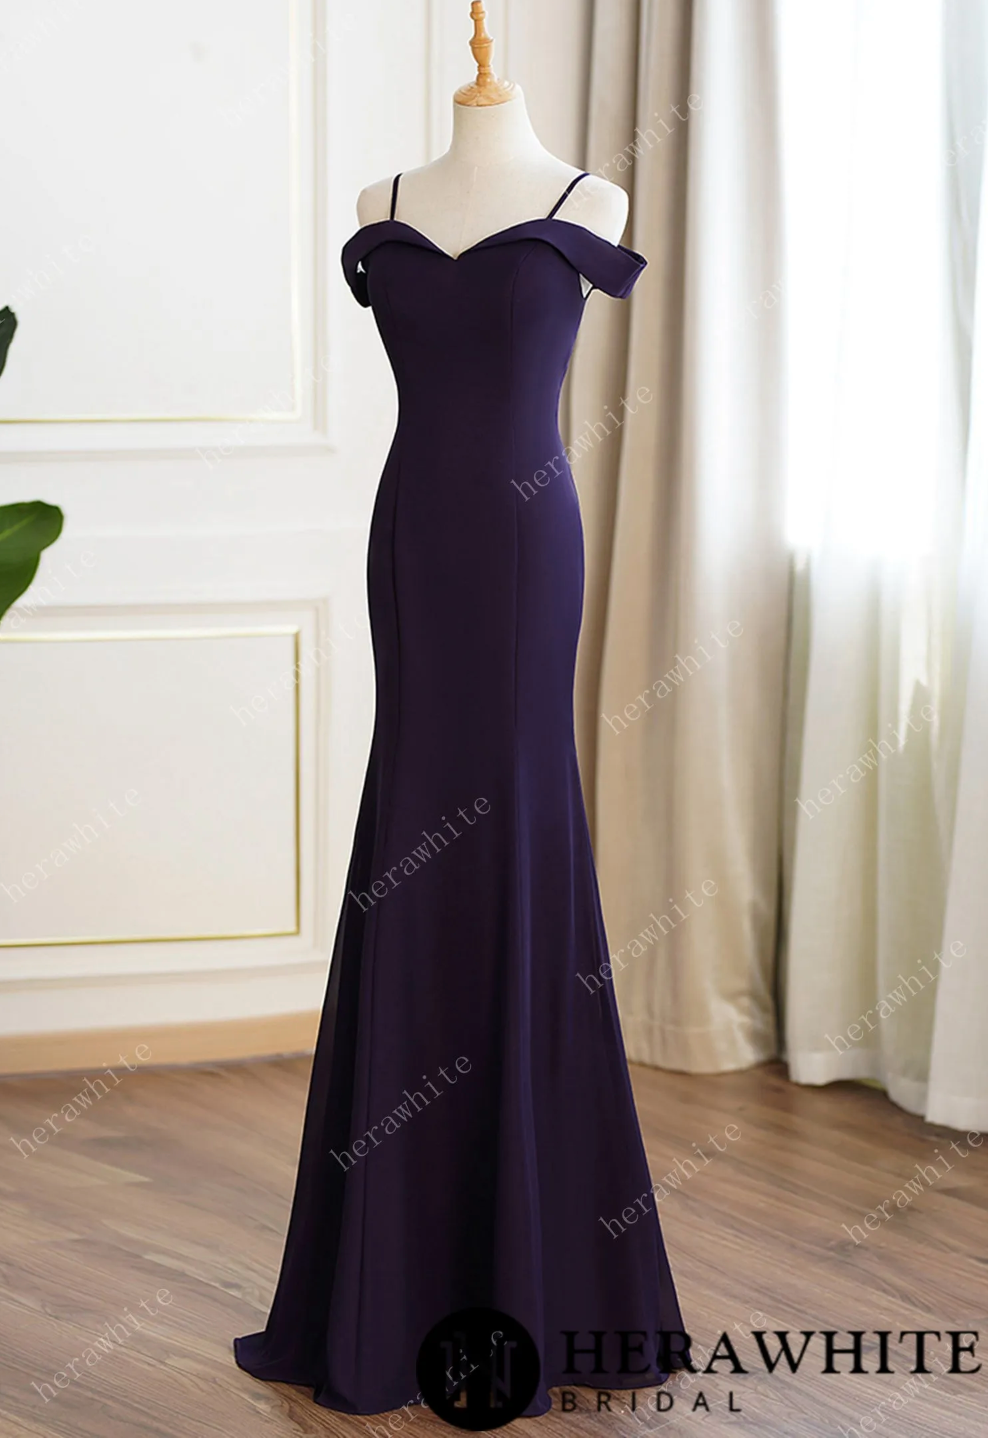 Grape Cold Shoulder Fit and Flare Bridesmaid Dress